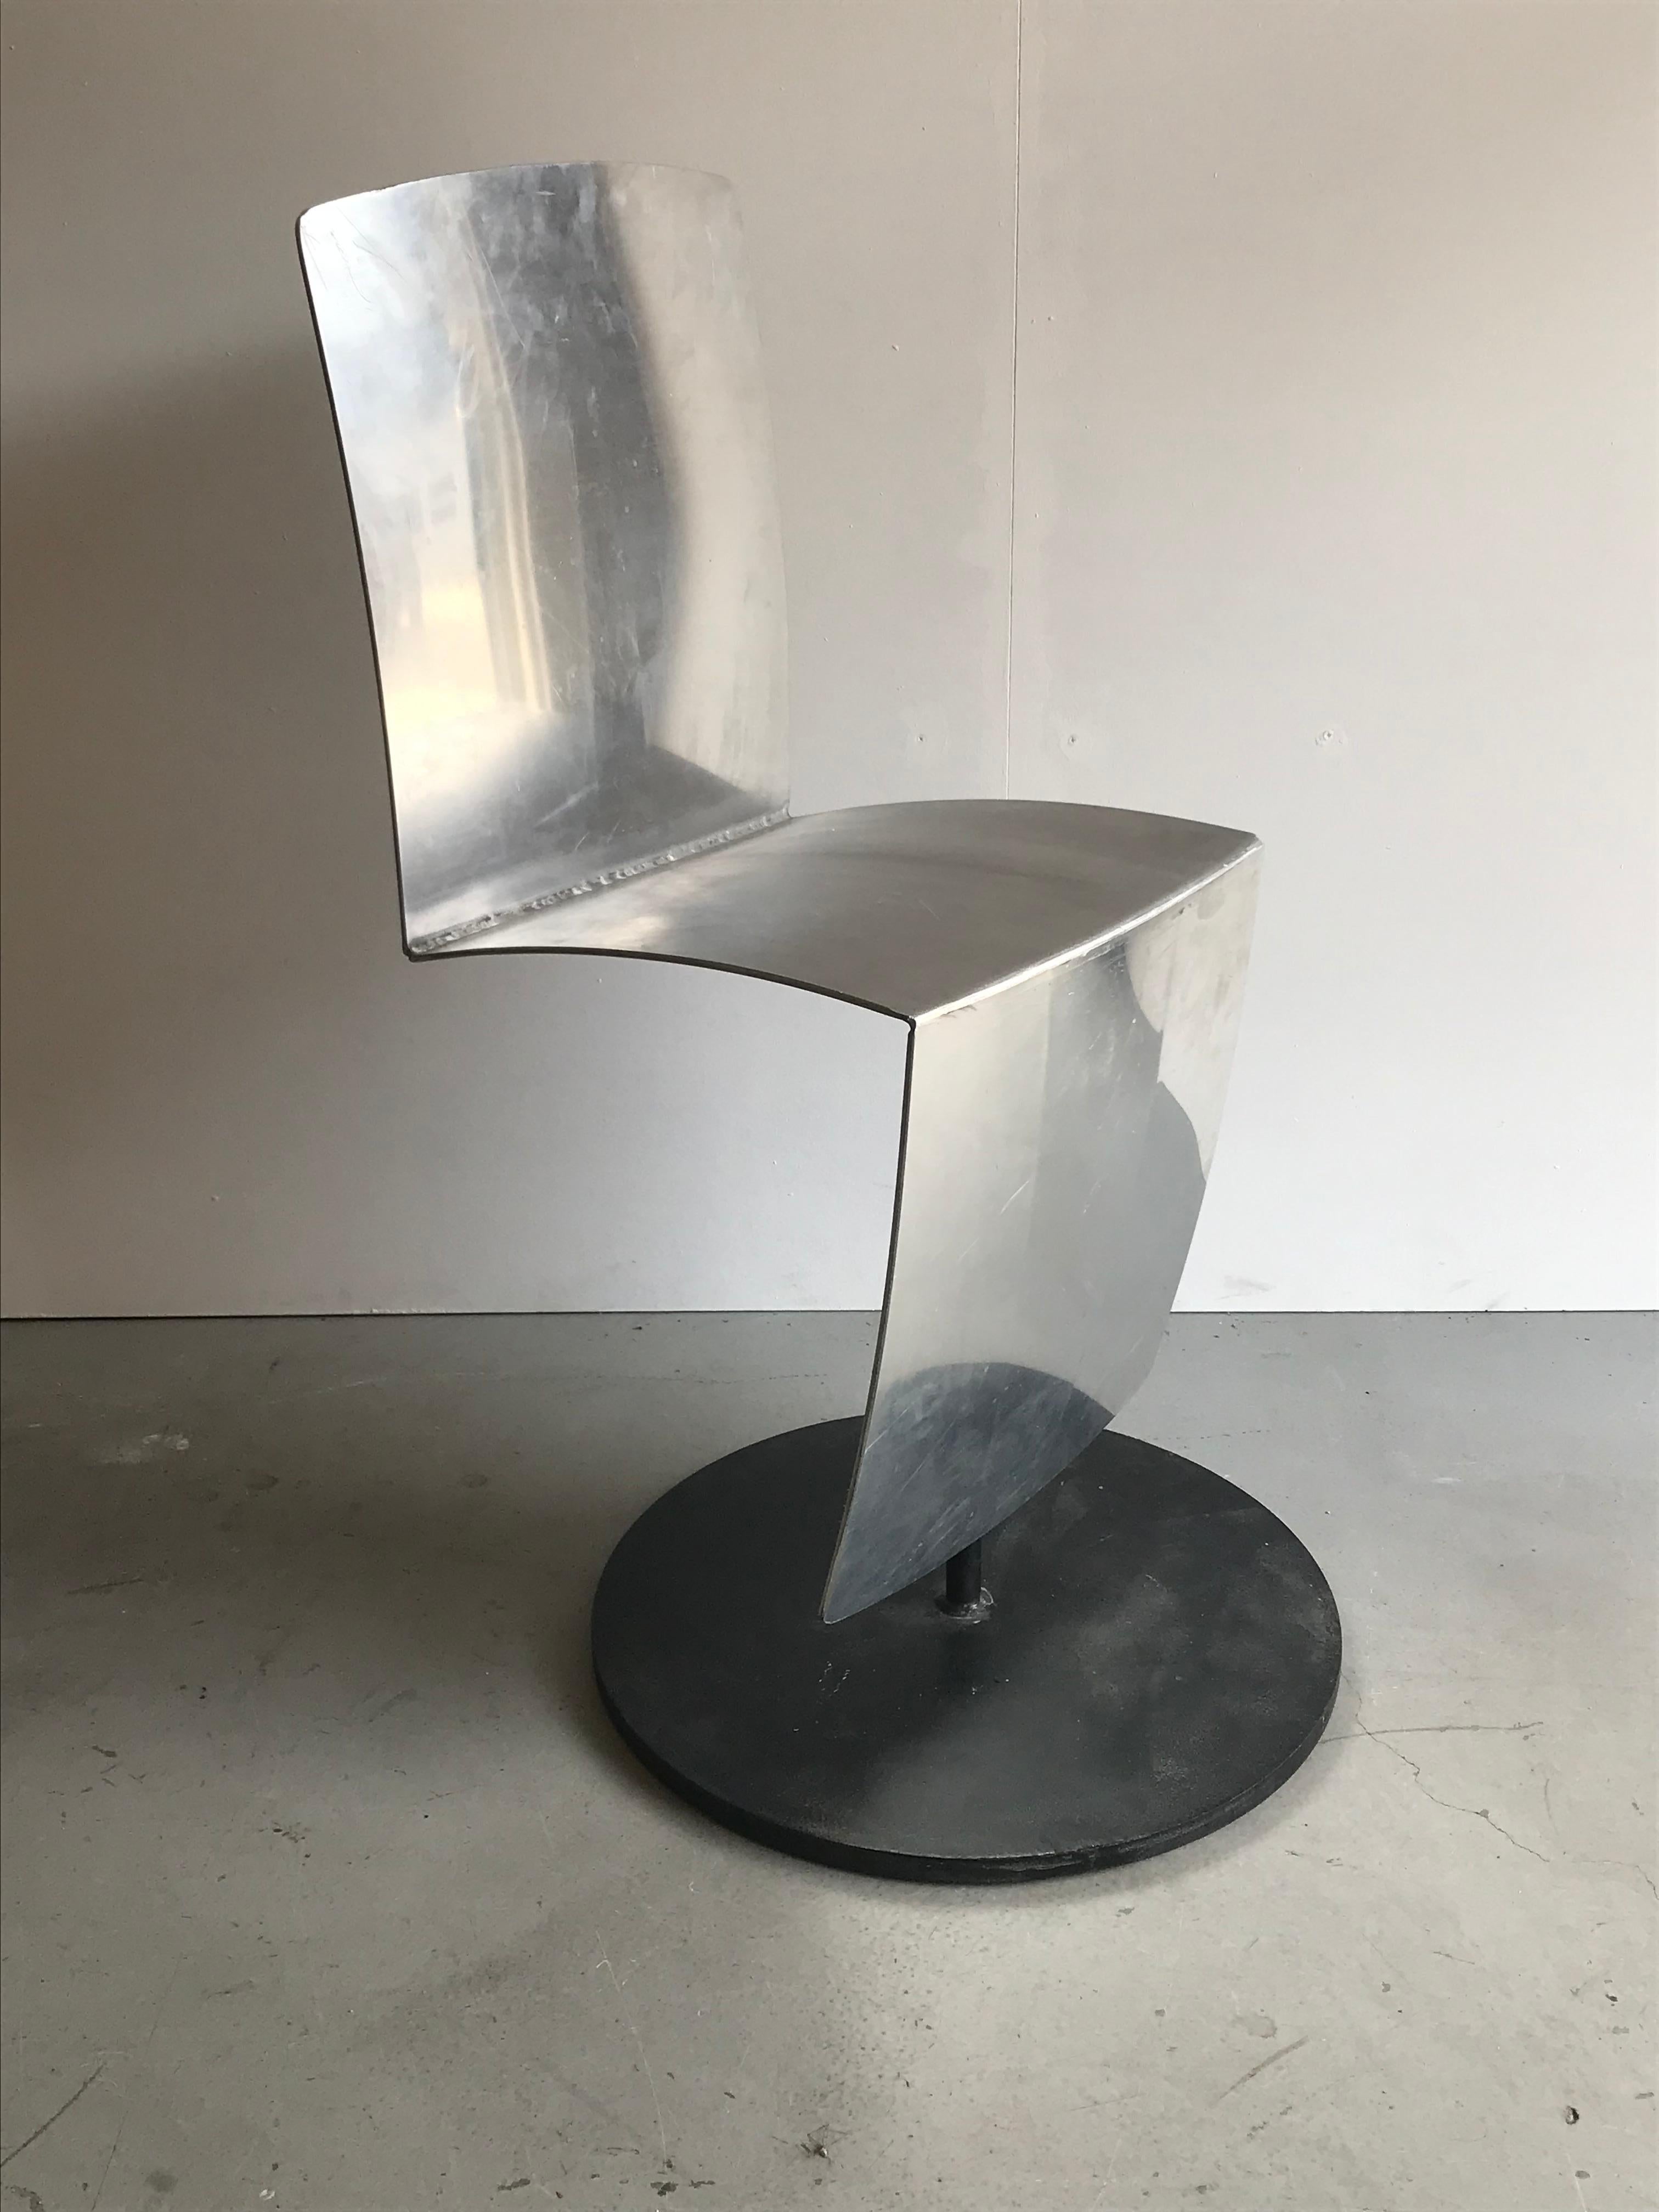 One very rare Philippe Starck chair from 1982.
In the 1980s Bernard Tschumi designed a large Parisian parc called Parc de la Villette. On the premises are located major concert halls, a dome and Cite des Sciences.
Several famous designers helped